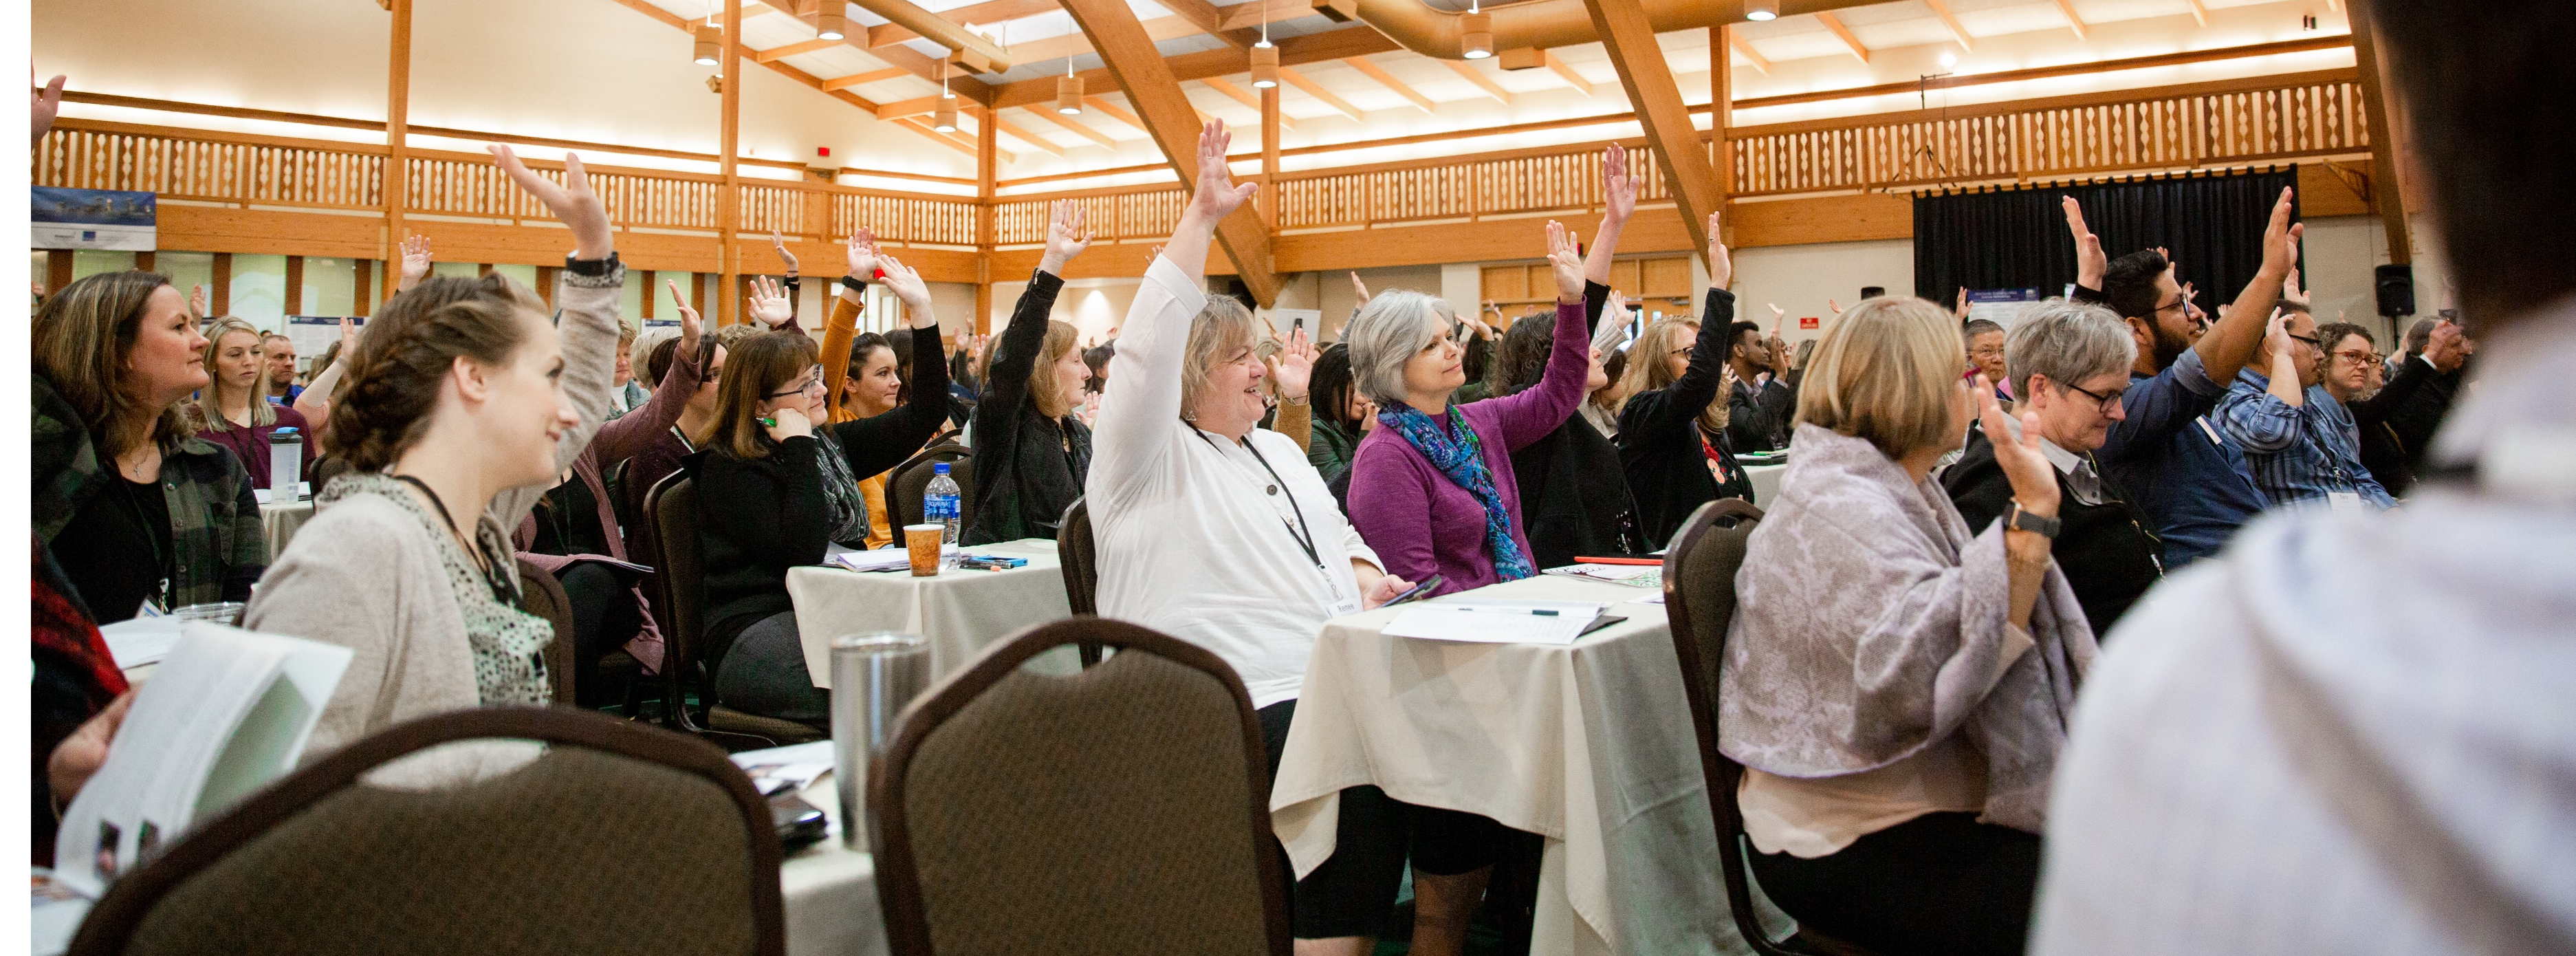 Attendees raising hands at a past MDH event